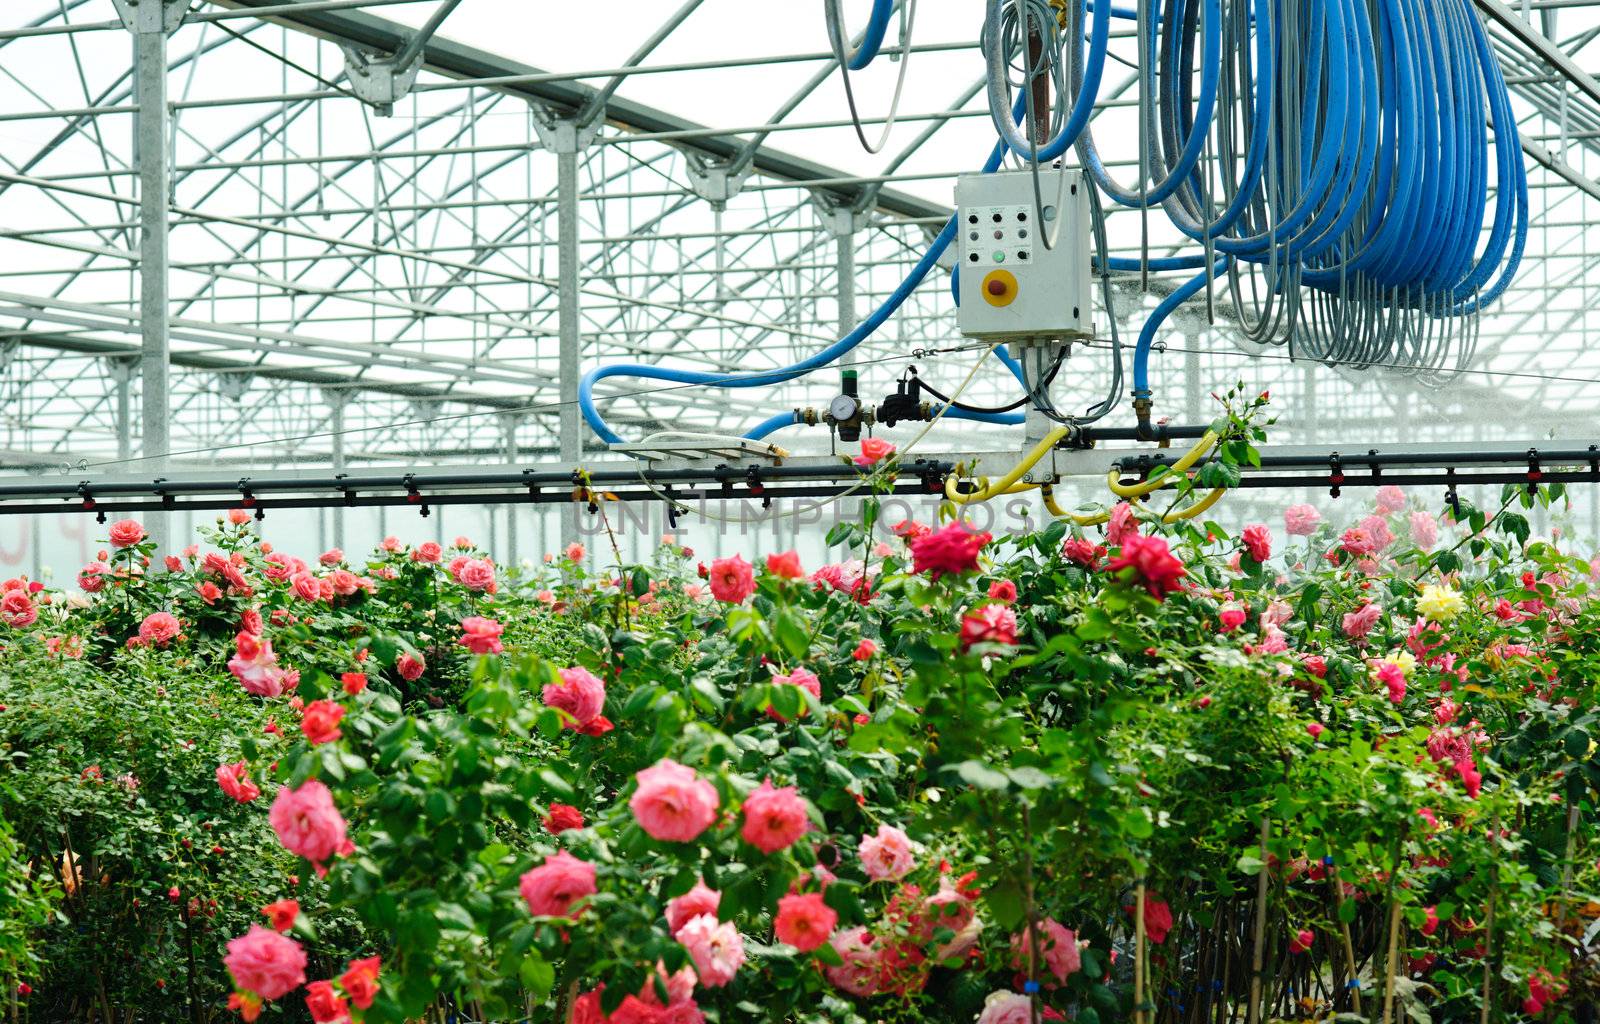 An image of a greenhouse with roses in it